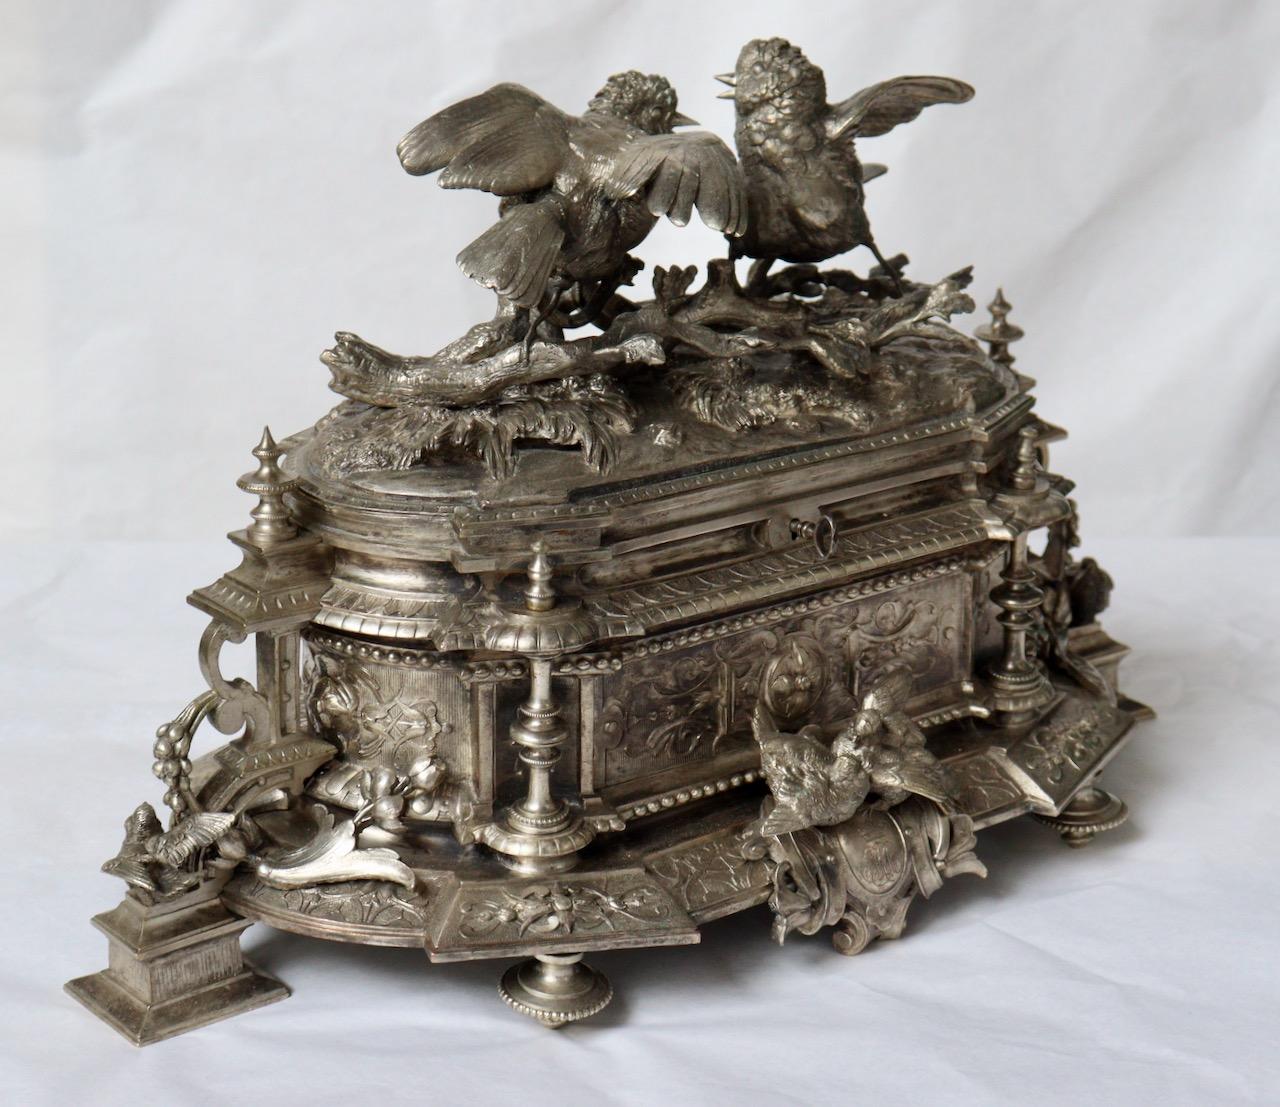 French 19th century jewelry casket by Alphonse Giroux et Cie Paris & J.Moigniez (1835-1894)
Silvered bronze richly decorated with Love Birds, branches and foliages
Signed J.Moigniez on the lid
Engraved Alph.Giroux et Cie Paris and silvered